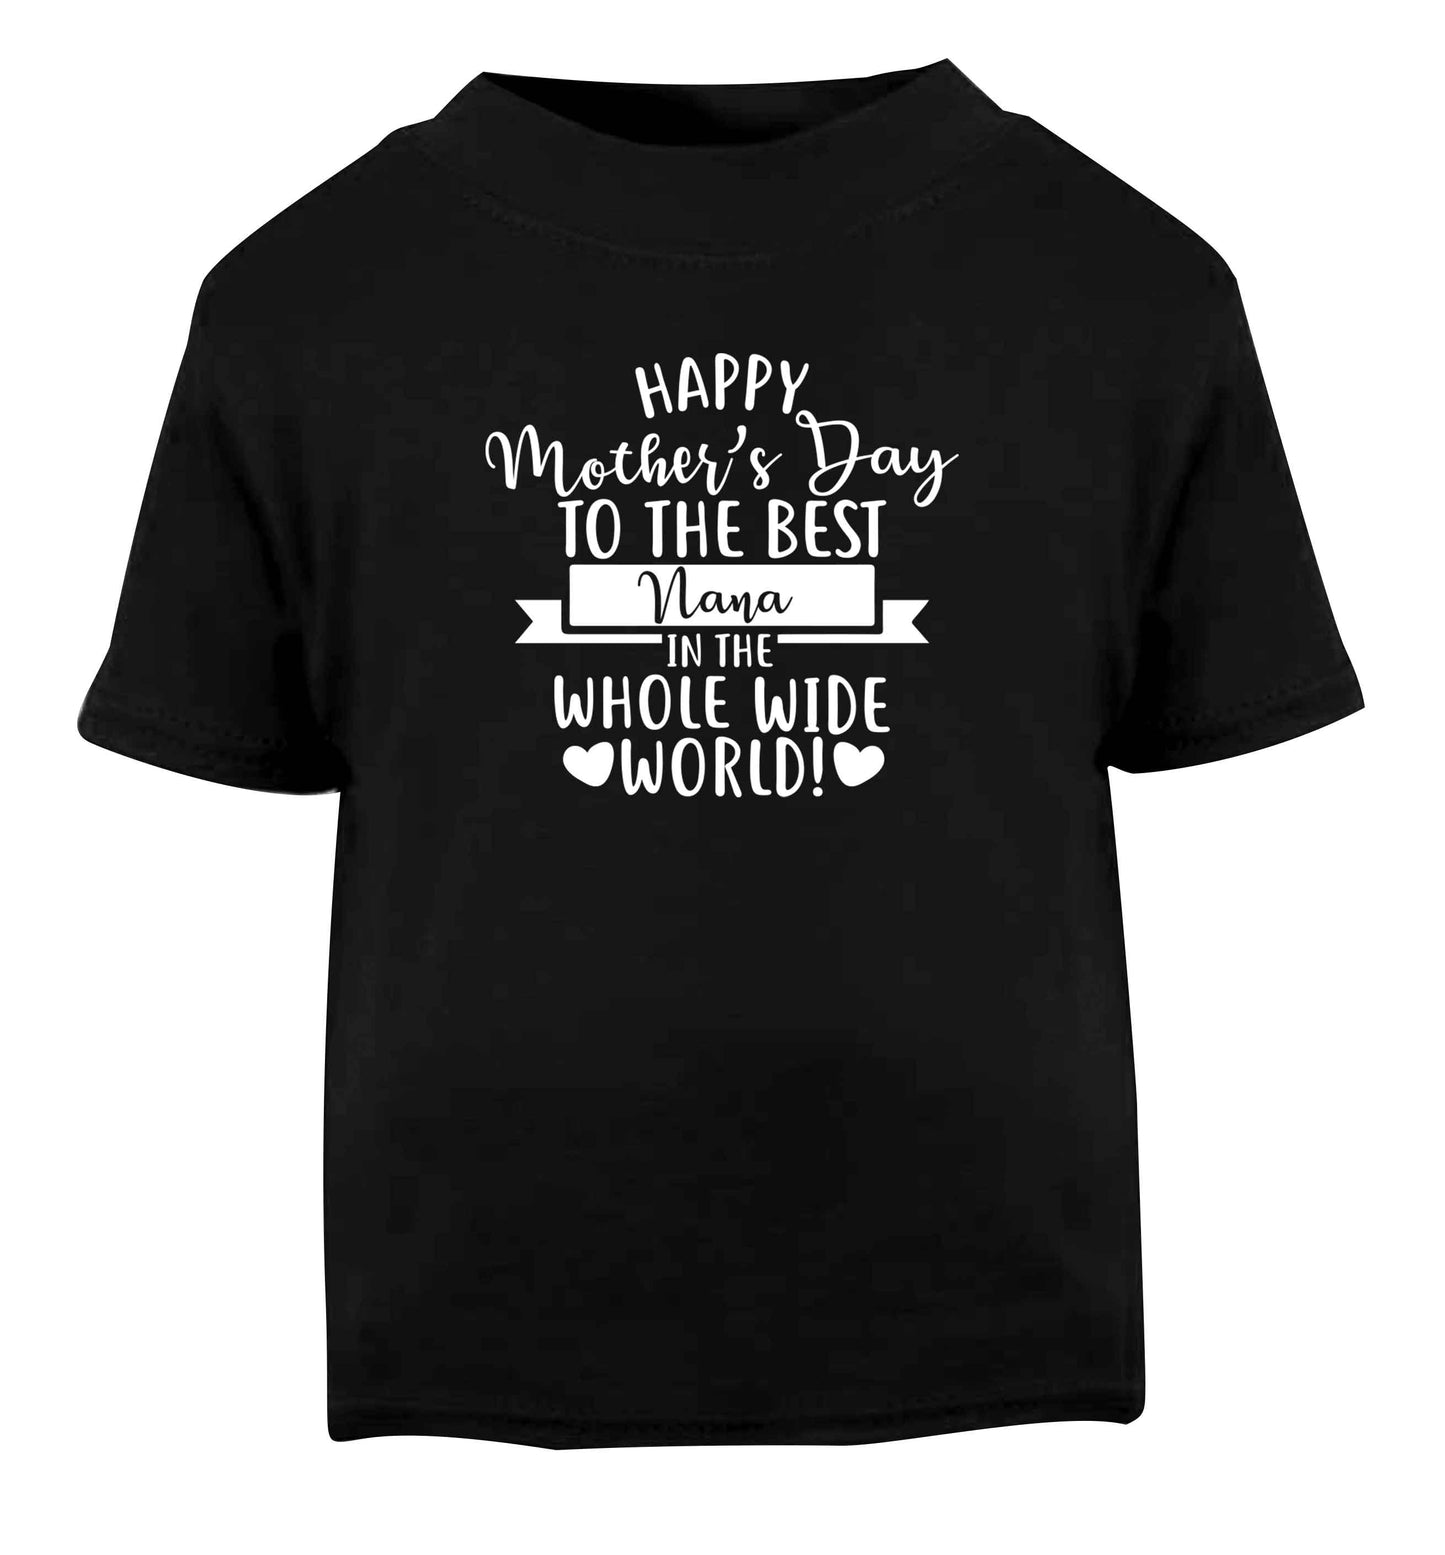 Happy mother's day to the best nana in the world Black baby toddler Tshirt 2 years